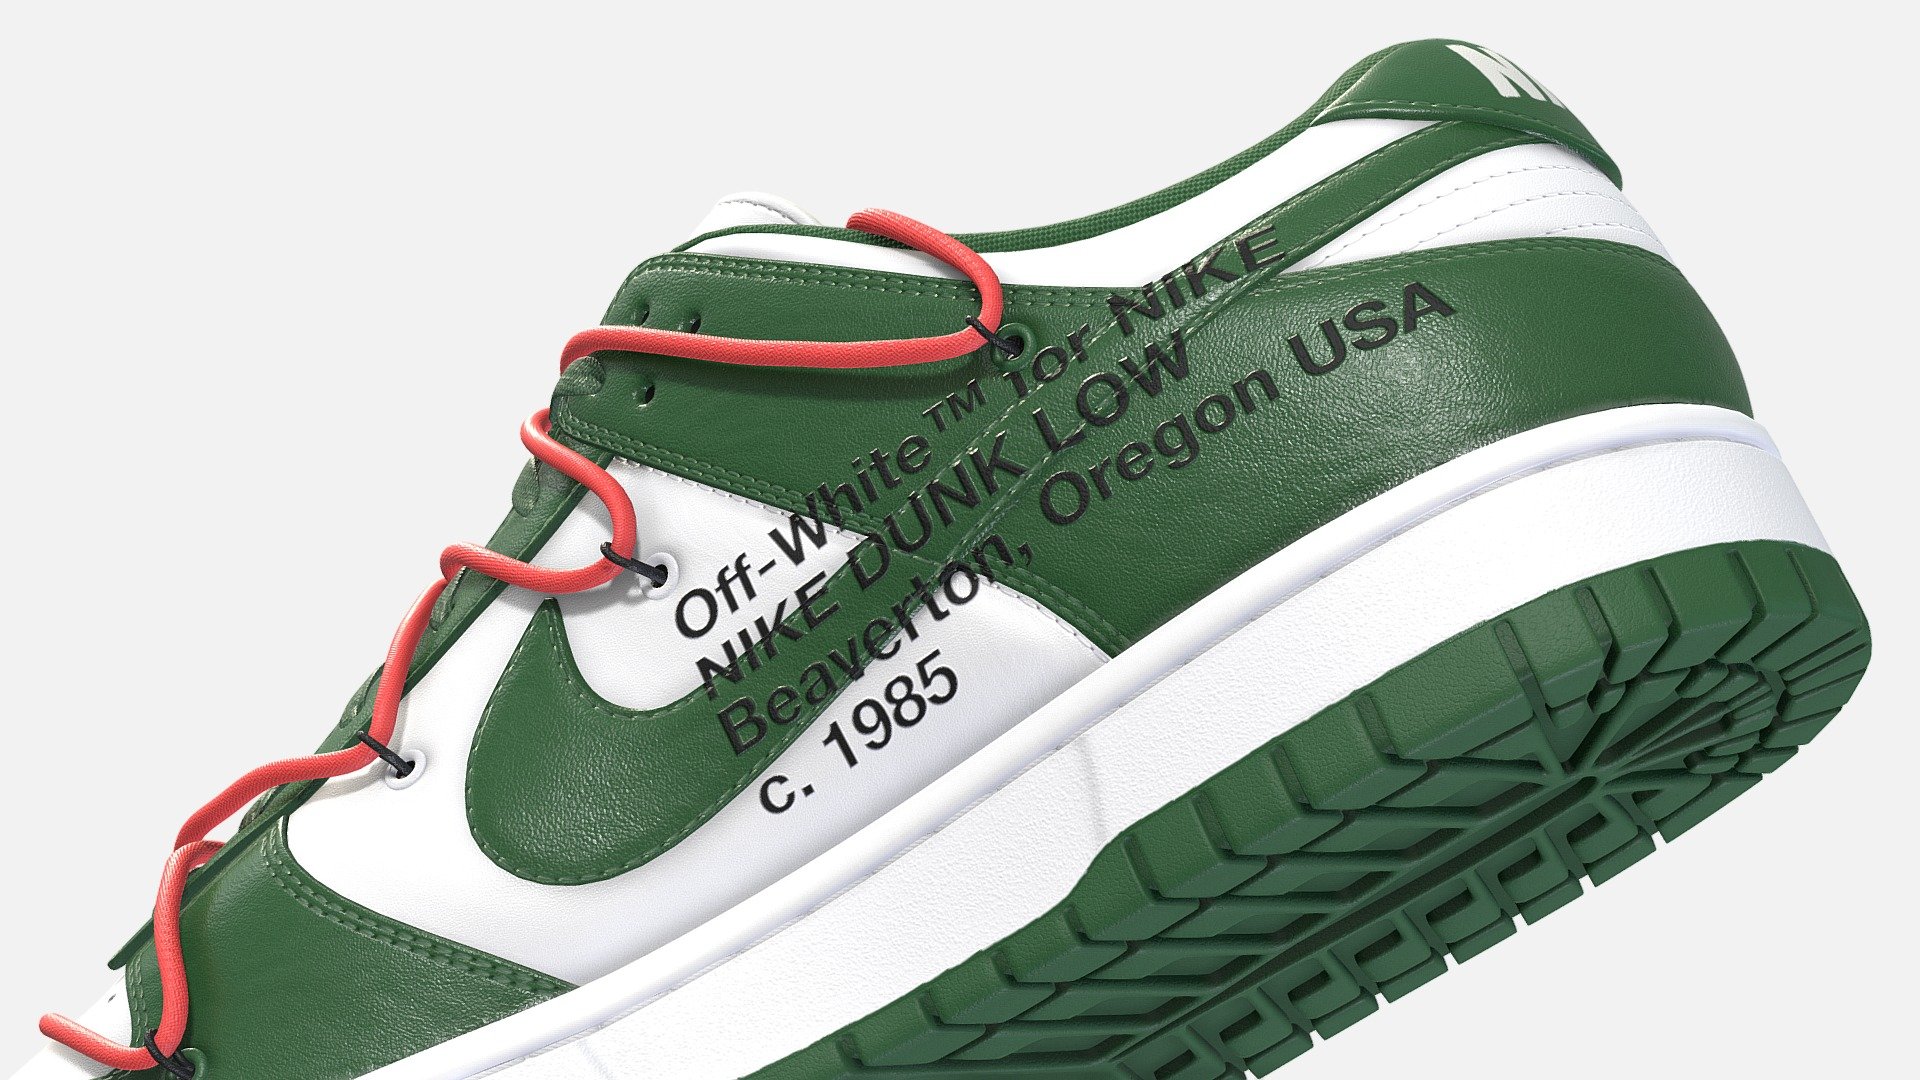 Off White collaboration with Nike on a Dunk low in Pine Green, made in Blender, textured in Substance. Virgil Ablohs take on the Nike Dunk first debuted in 2019, A reimagined tongue coupled with bright, Flywire lacing helped this shoe to stand out and cement its place in the storied legacy of the Nike Dunk. This colourway boasts pine green leather accented by a smooth white leather. 

Every detail was made in the recreation of this shoe, from the text on the medial side of the shoe to the subtlety of each material, nothing went overlooked. The model itself is subdivision ready and consists of four texture sets. The model on display is at Subdivision level 1 and each texture is at 4096x4096 resolution. Model on display uses: Base Color, Metallic, Roughness, Normal Map, Ambient Occlusion

Download File Contents:
1. Native Blender file with linked textures
2. Folder containing all textures in 4096x4096 png format. 
4. FBX and OBJ versions of the shoes - Nike Dunk Low x Off White Pine Green Shoe - Buy Royalty Free 3D model by Joe-Wall (@joewall) 3d model